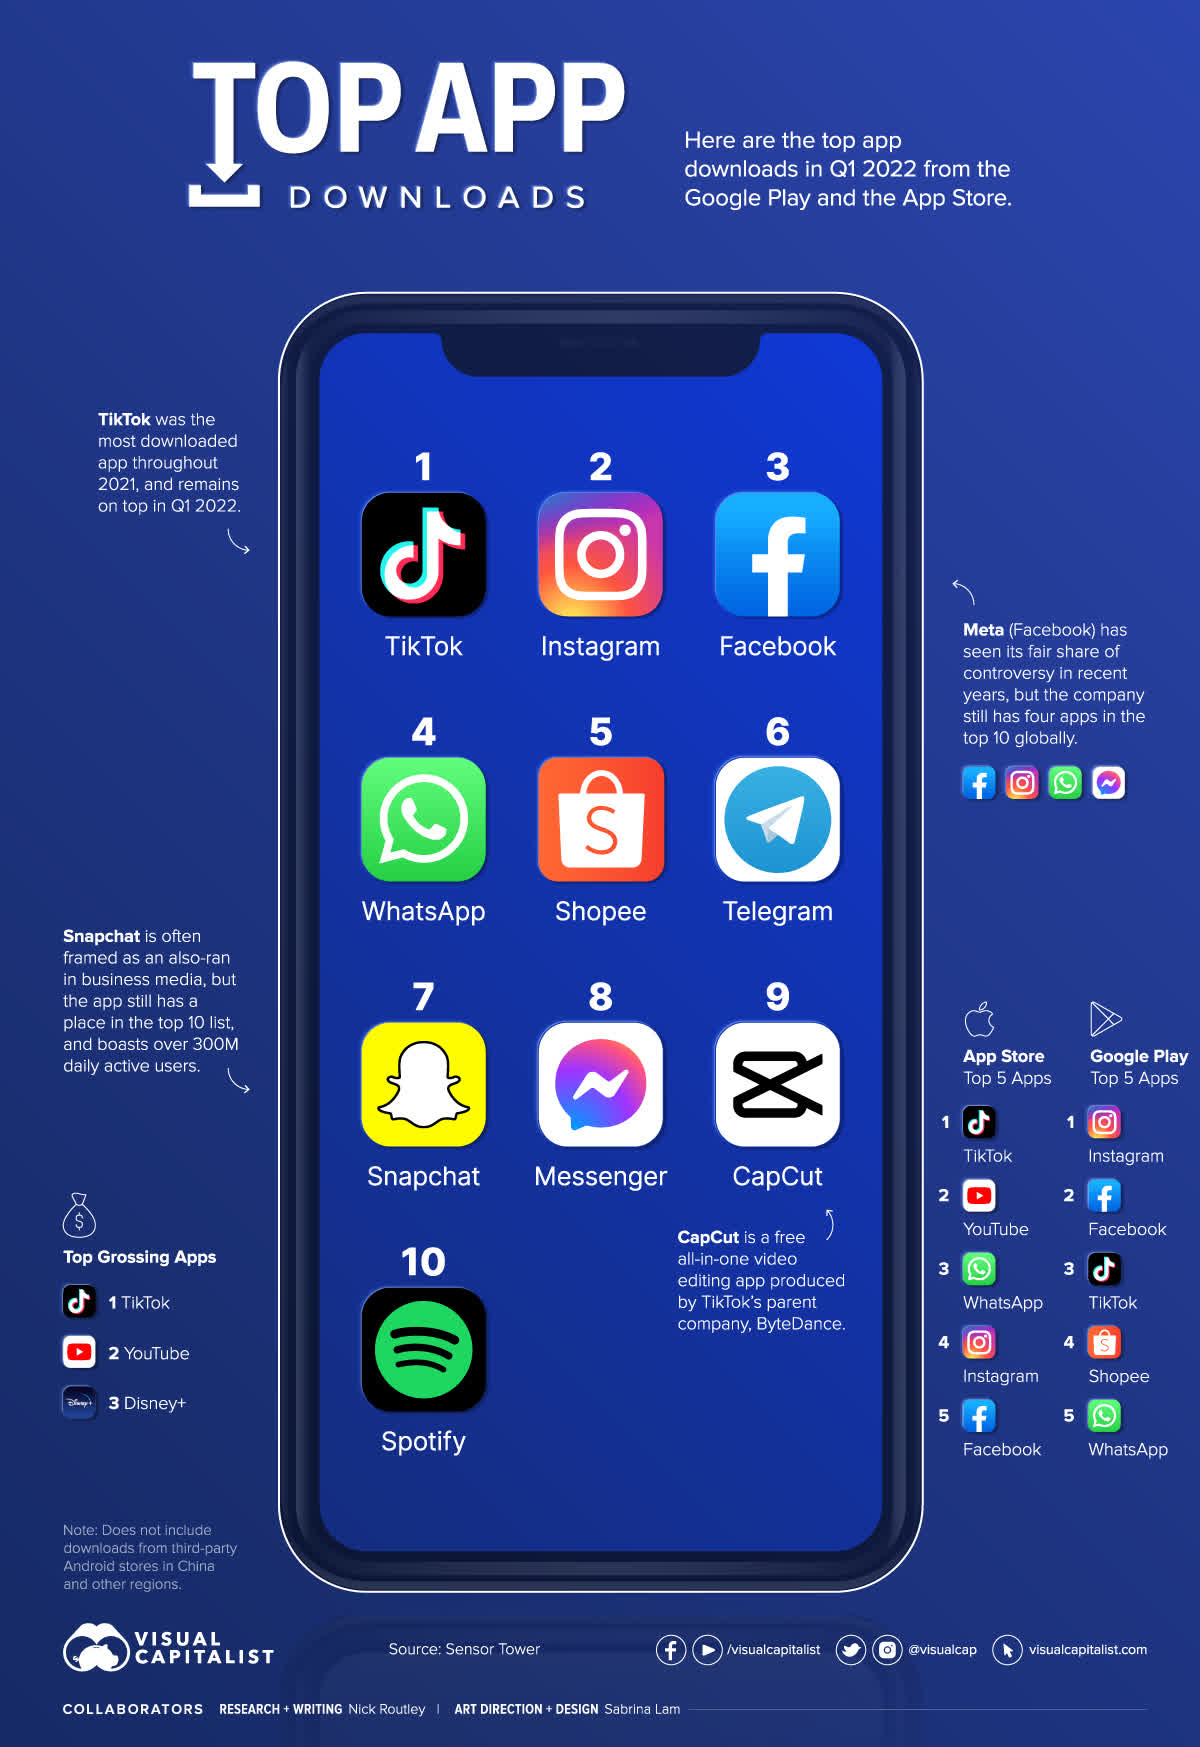 Meta platforms, META, META stock, Metaverse, Apple privacy changes, Meta Family of apps, FoA, Facebook, Instagram, Whatsapp, Conversions API Gateway, Chart of the top 10 most downloaded apps in Q1 2022, based on number of downloads